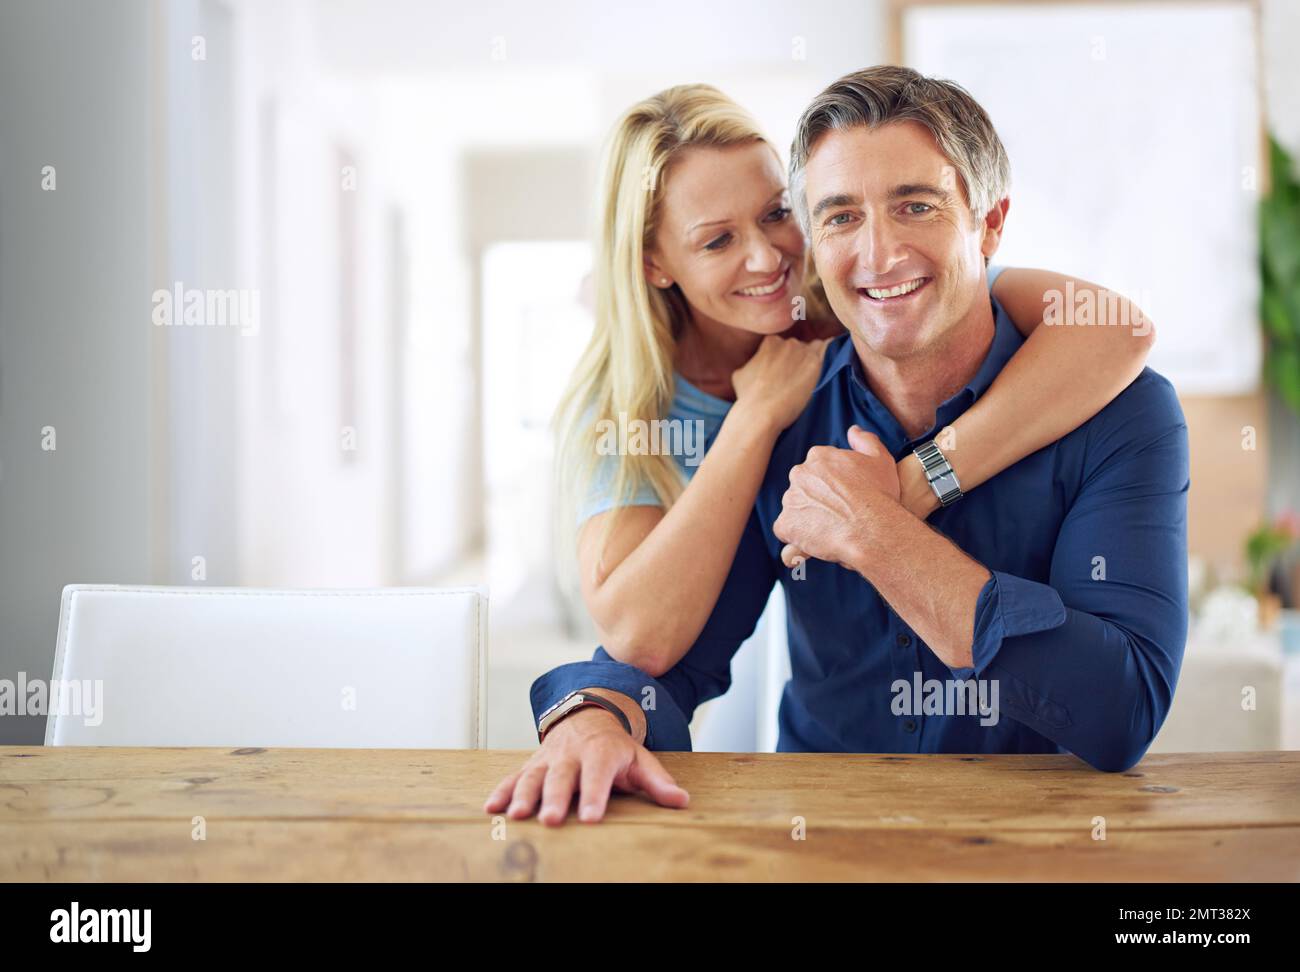 Our home is our hearth. Portrait of an affectionate mature couple at home. Stock Photo